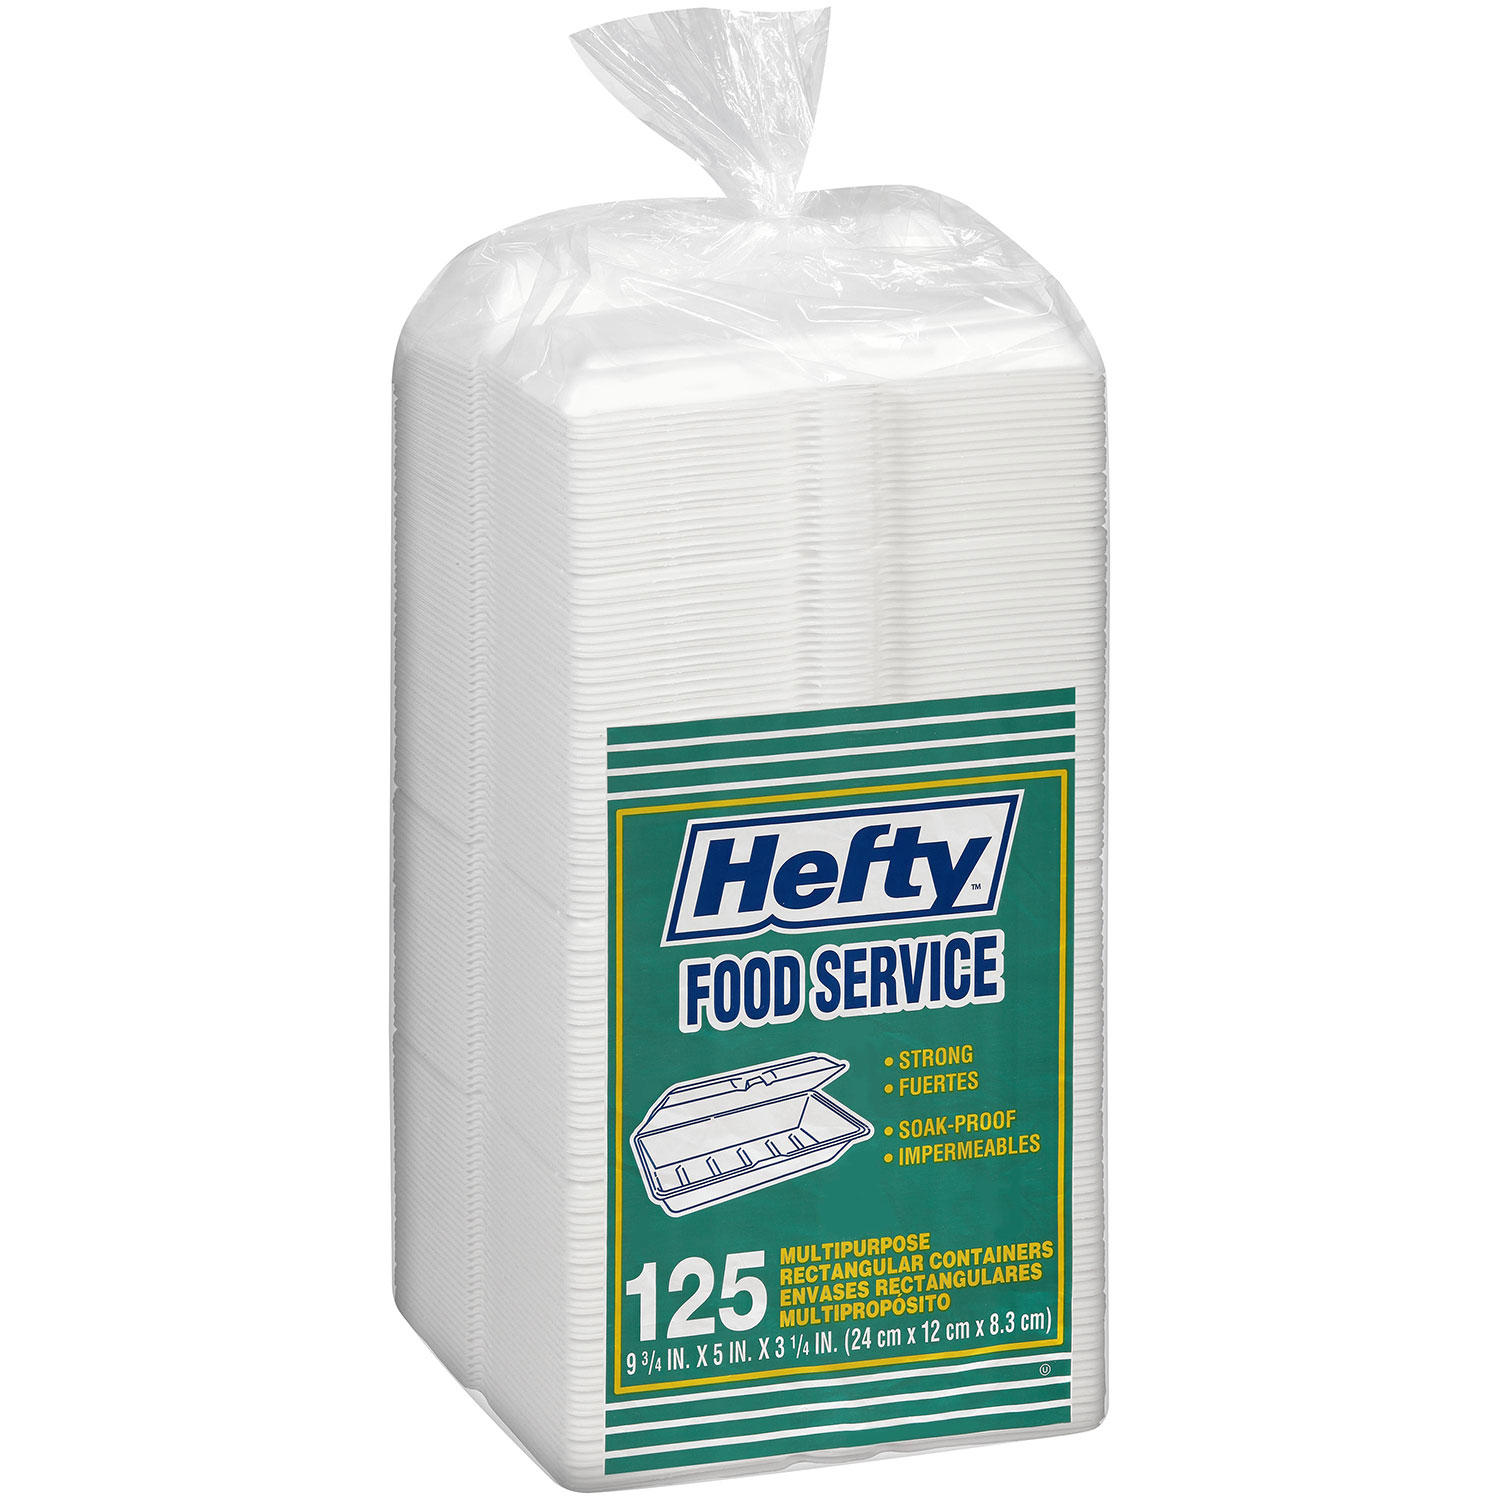 Hefty Food Service Containers Rectangle 9 3/4 x 5 x 3 1/4 (125ct.)